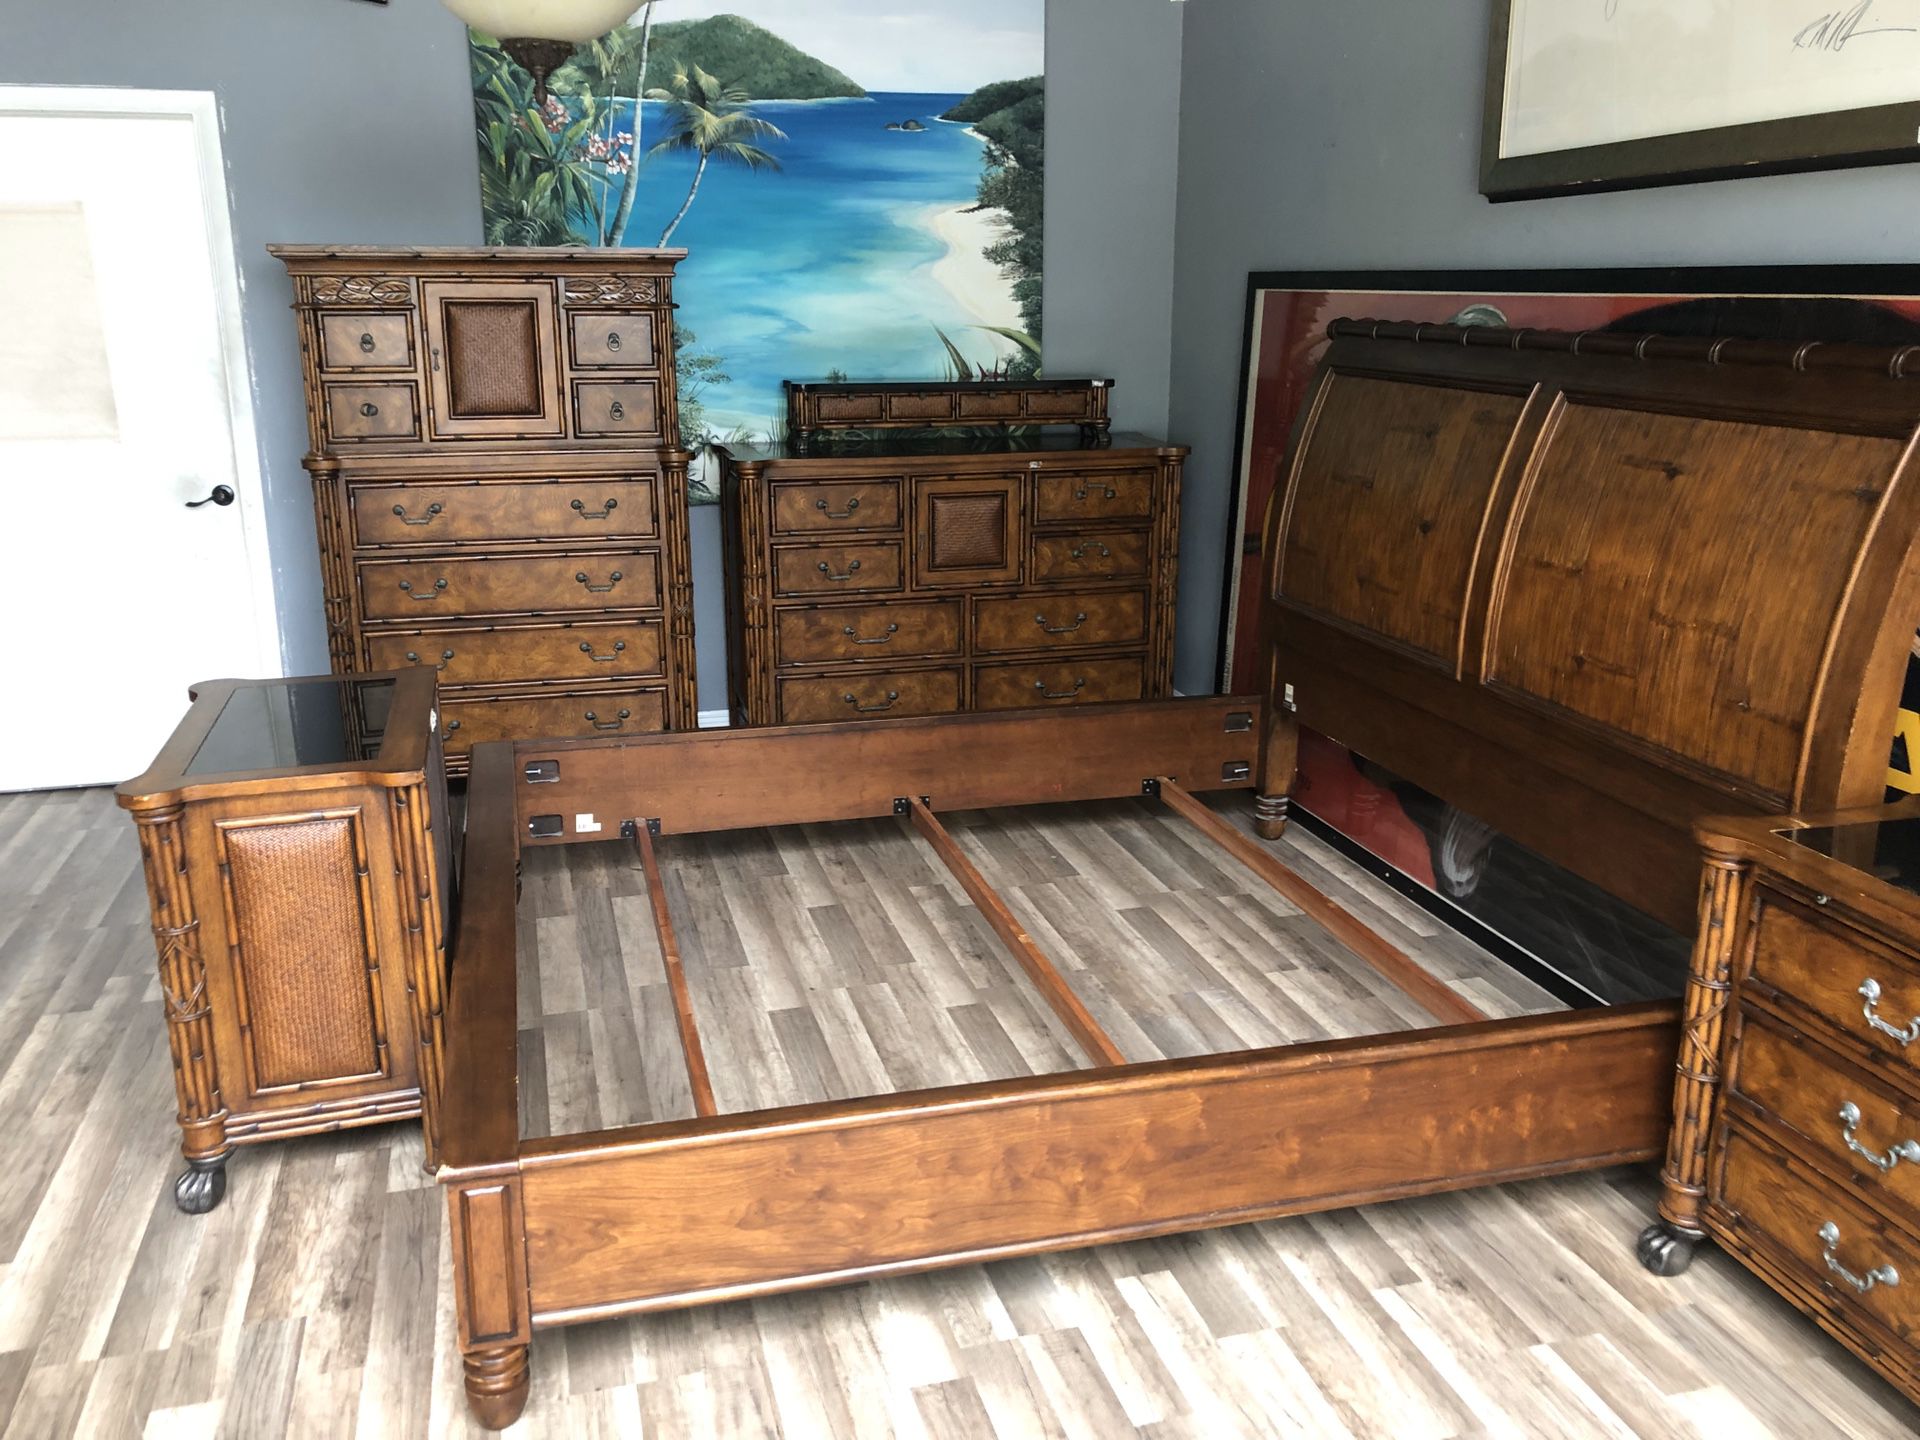 6 Piece Tommy Bahama Style American Signature Bamboo King Size Bedroom Set Marble Tops Excellent Condition 2 Nightstands, Dresser, Chest, King Bed